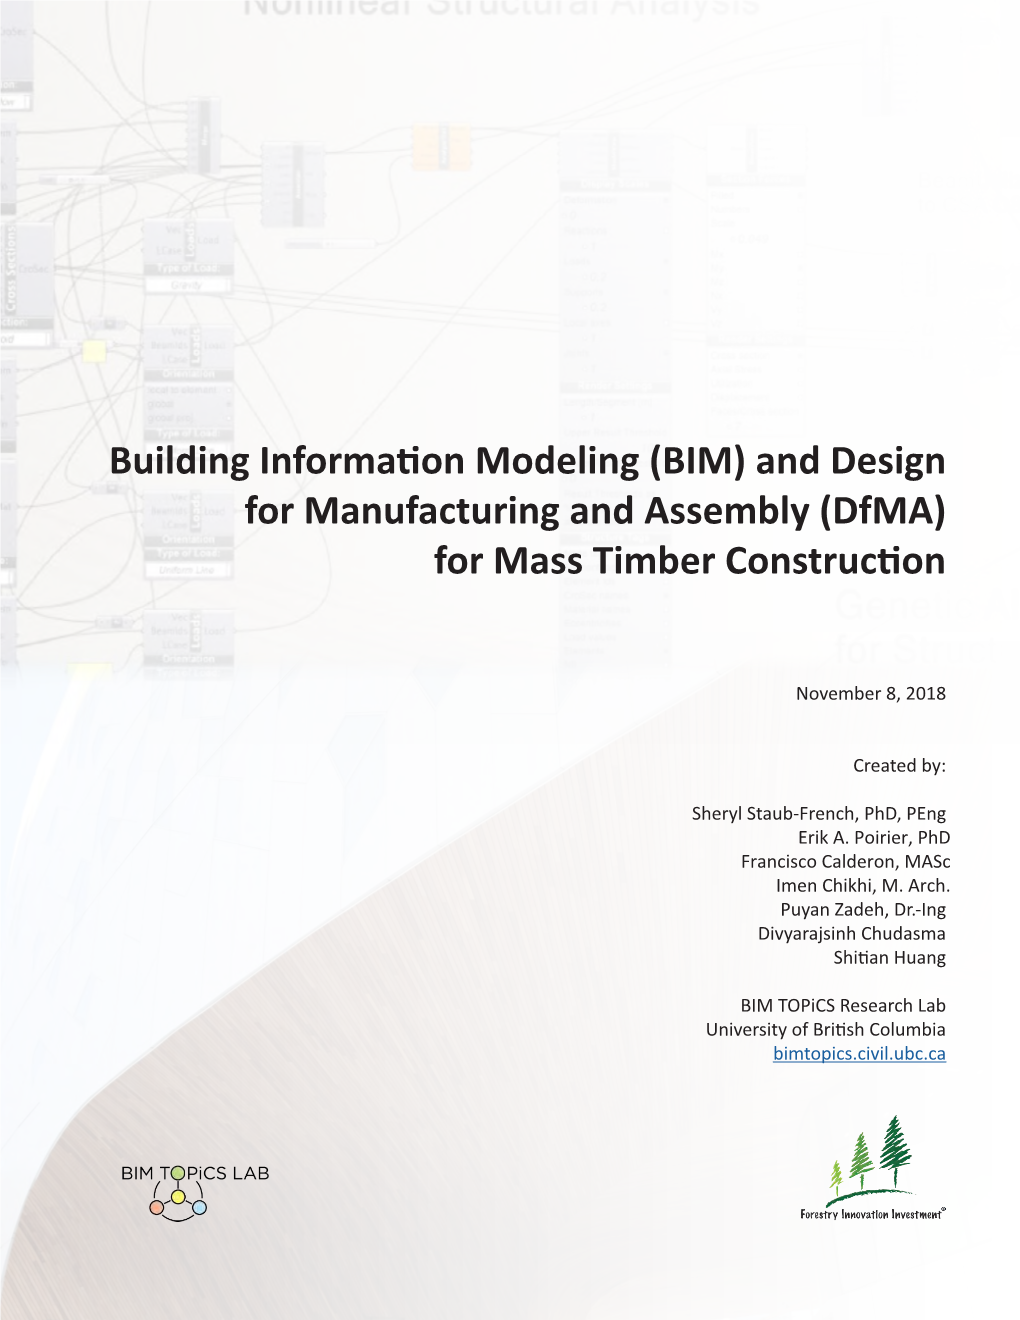 BIM) and Design for Manufacturing and Assembly (Dfma) for Mass Timber Construction